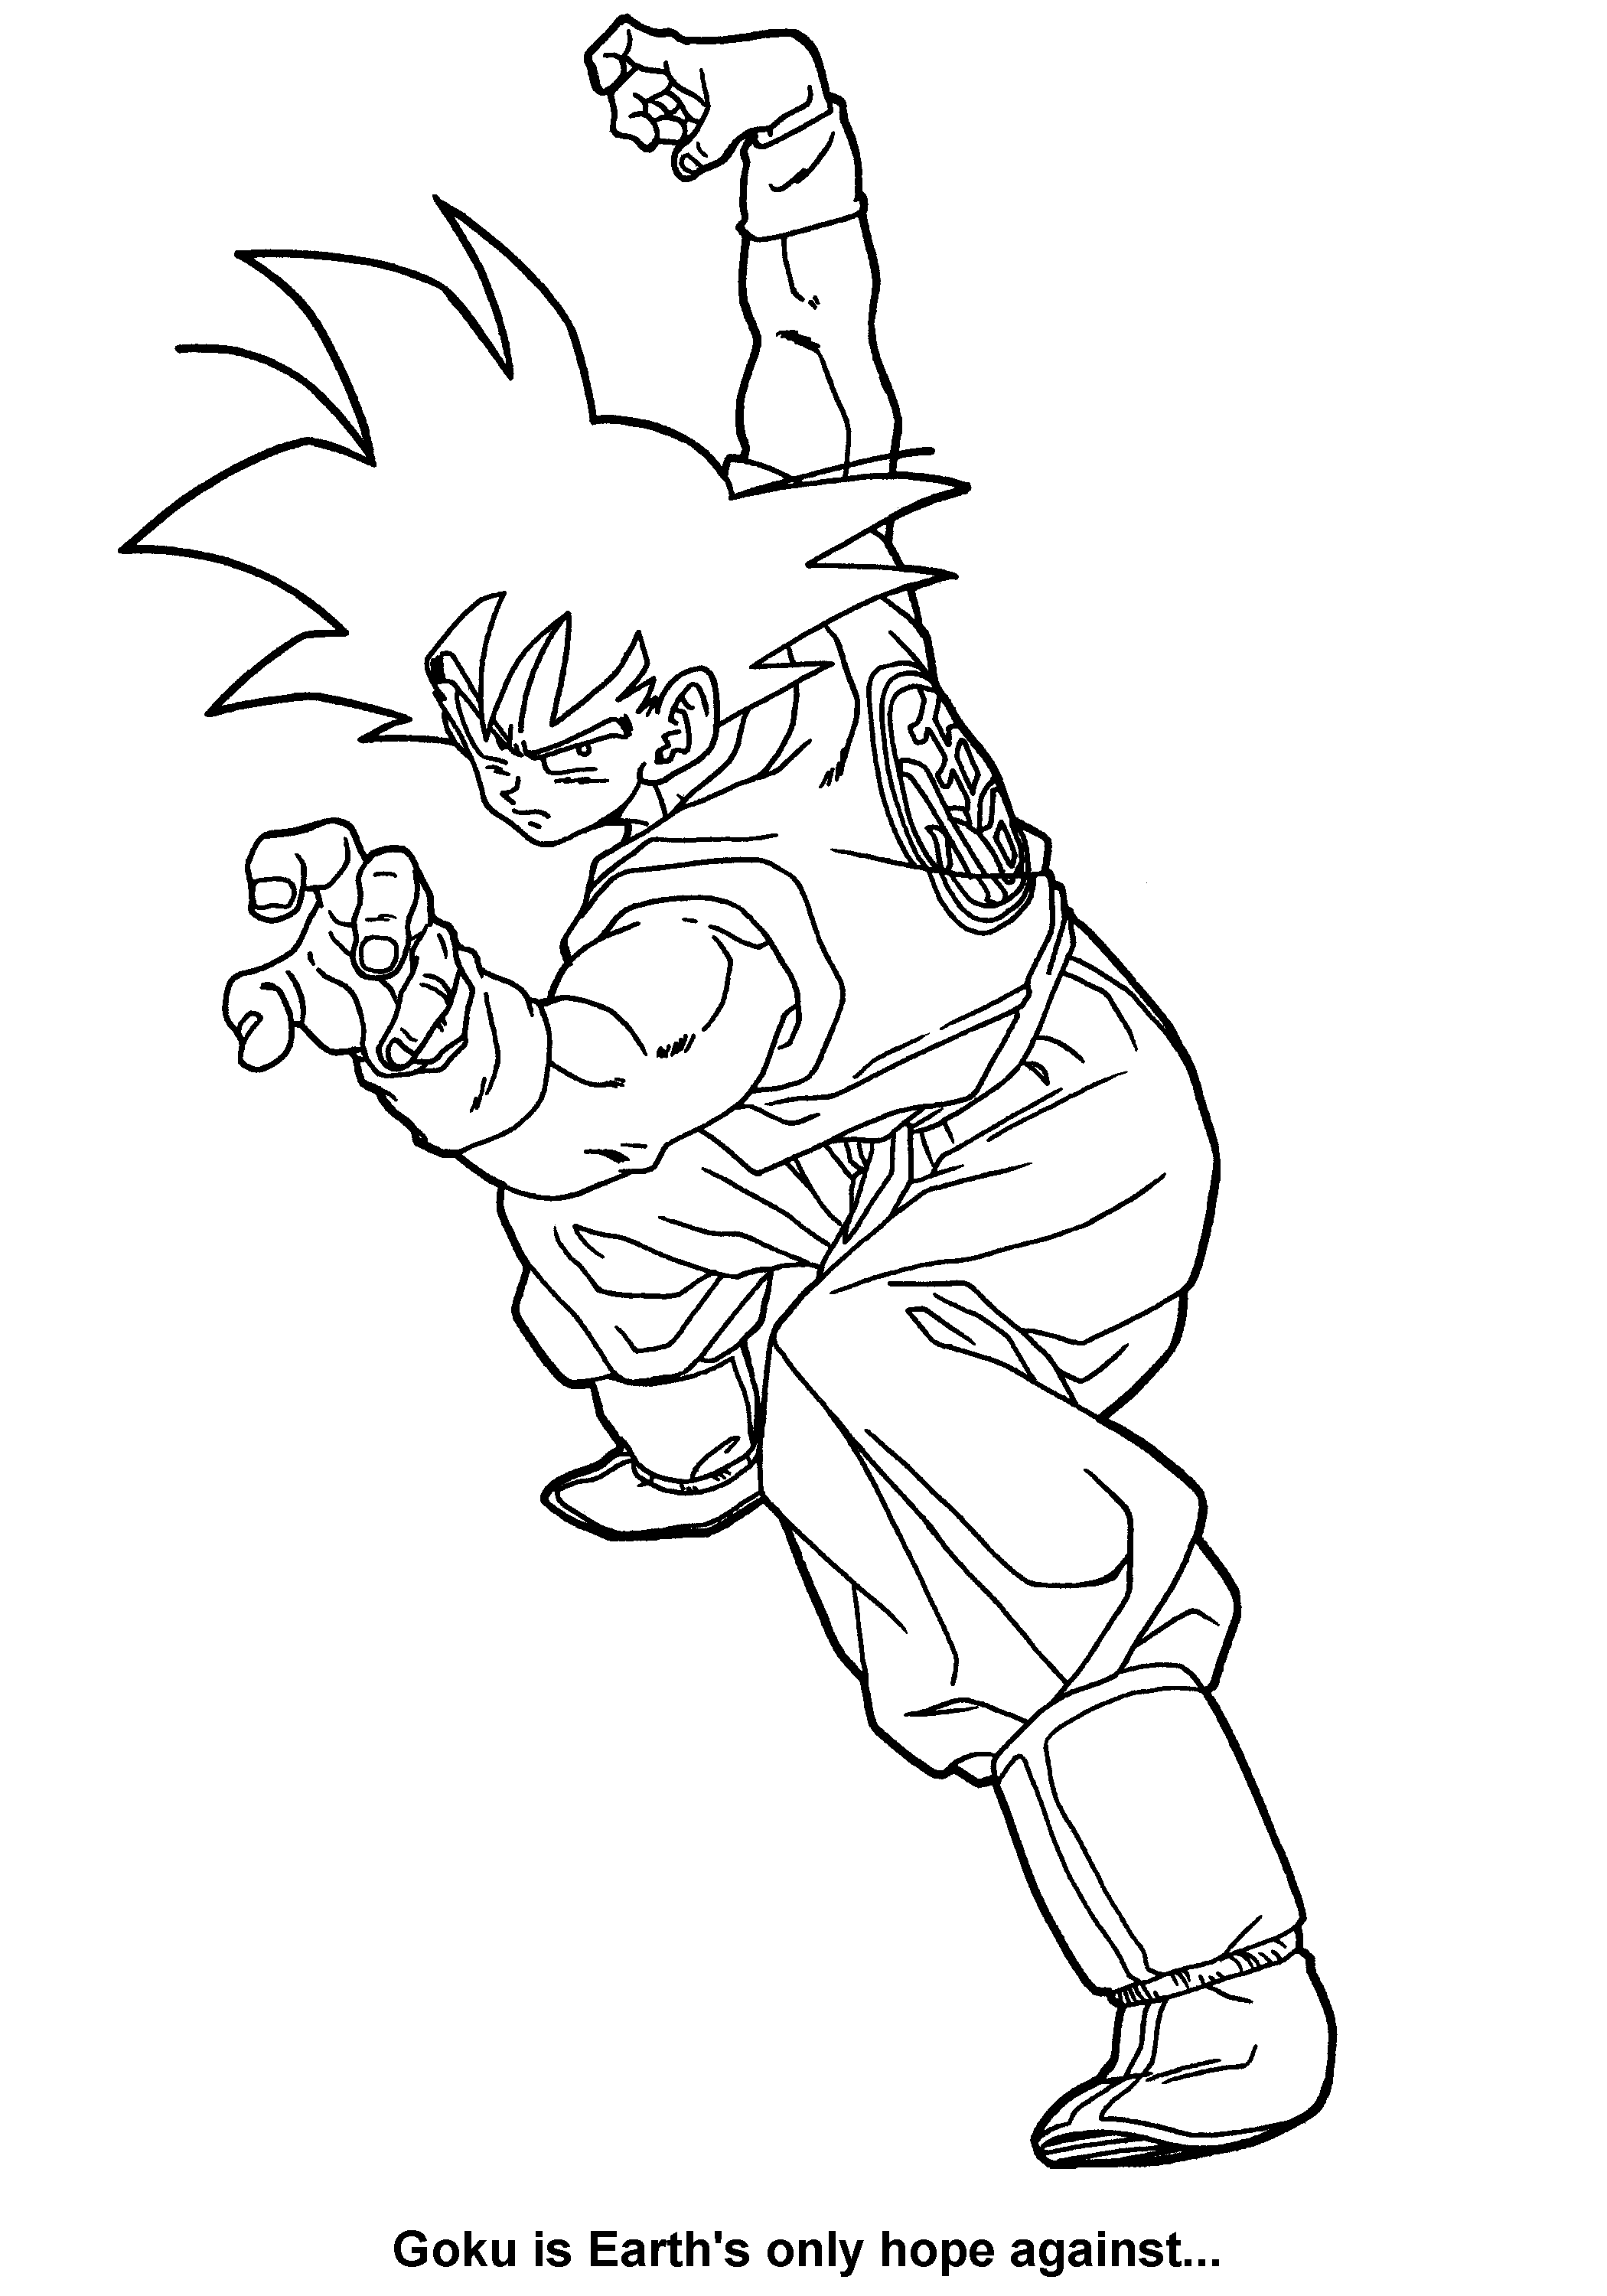 Dragon ball z Coloring Pages - Coloring - Coloring Pages ...